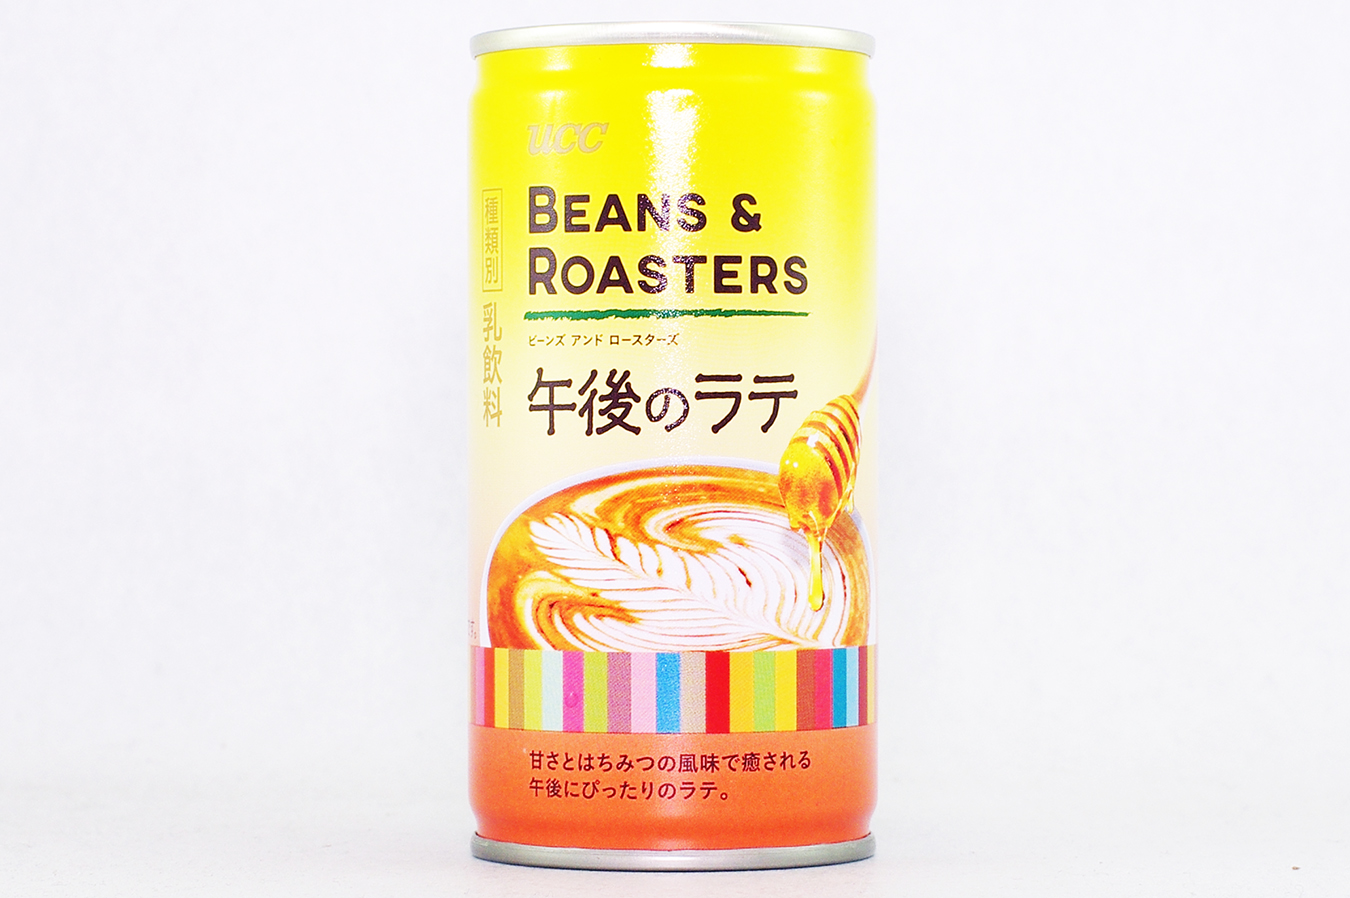 UCC BEANS & ROASTERS 午後のラテ 2018年9月